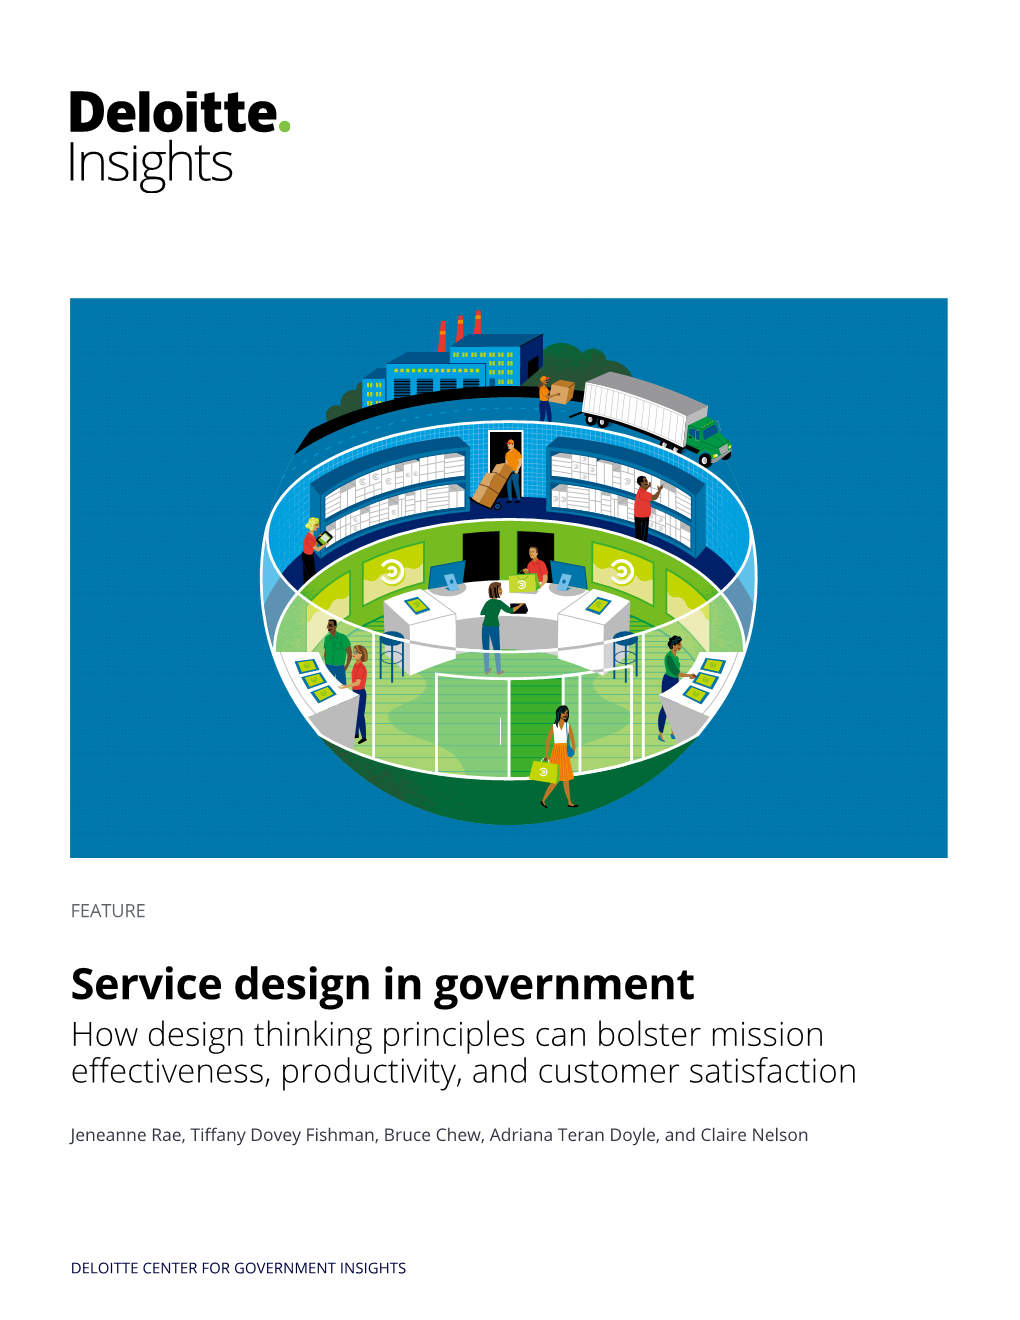 Service Design in Government How Design Thinking Principles Can Bolster Mission Effectiveness, Productivity, and Customer Satisfaction